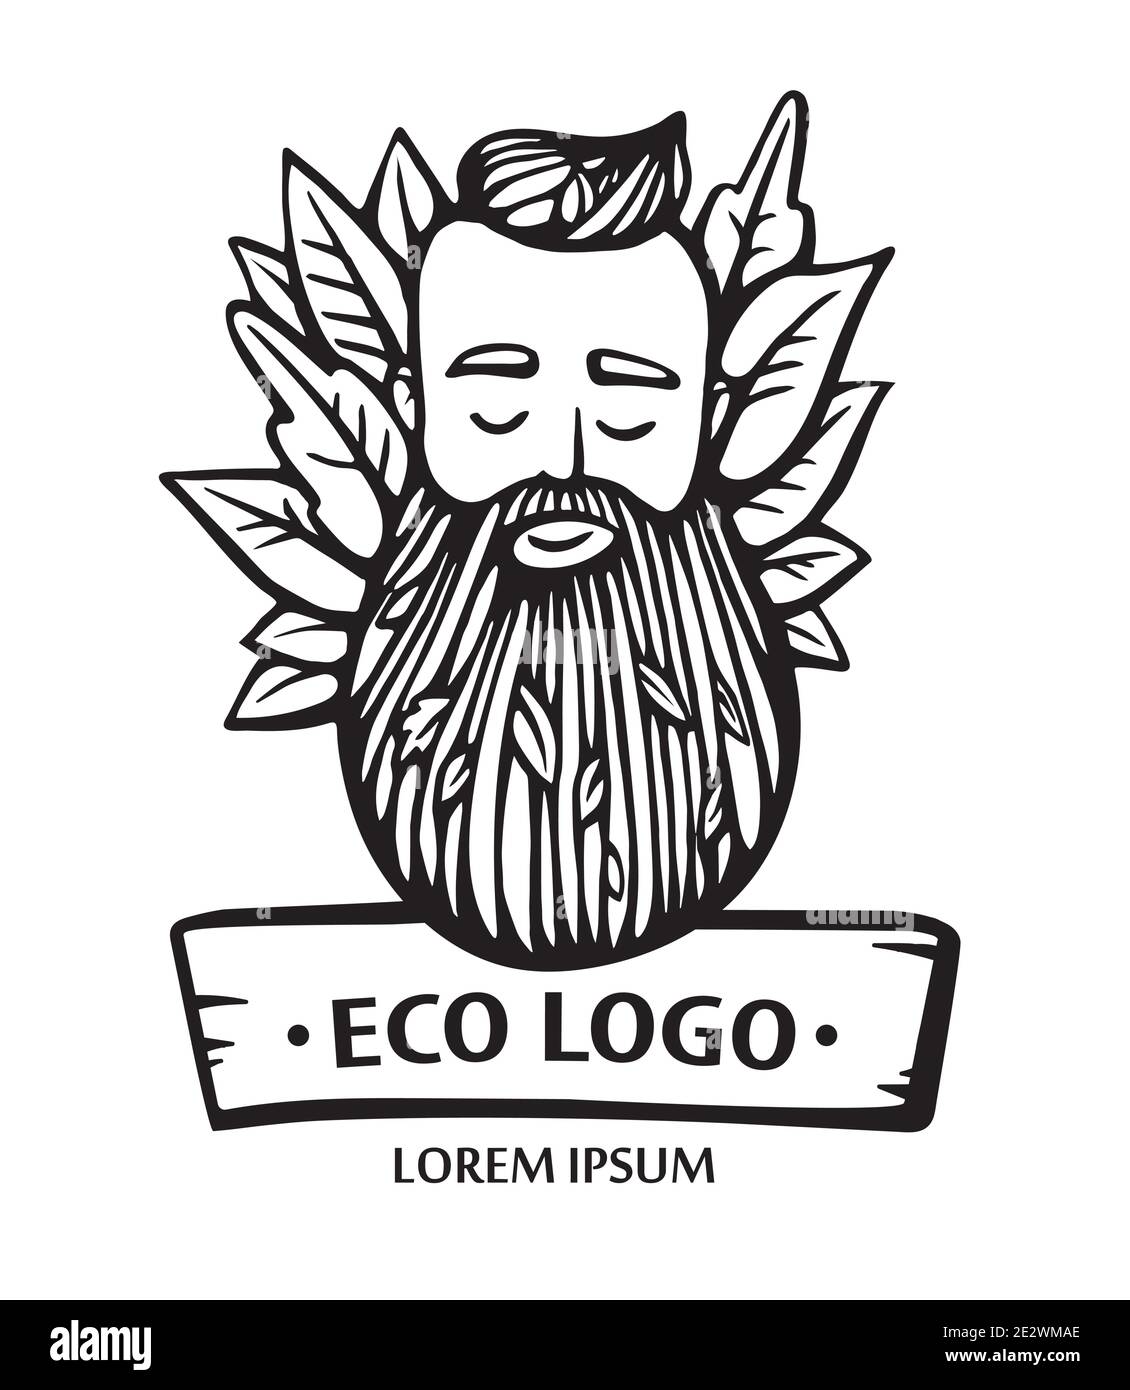 Eco Nature Logo. Hipster Head with Blooming Beard with Leafs. Hand-Drawn  Vector Illustration Stock Vector - Illustration of natural, logo: 157577274